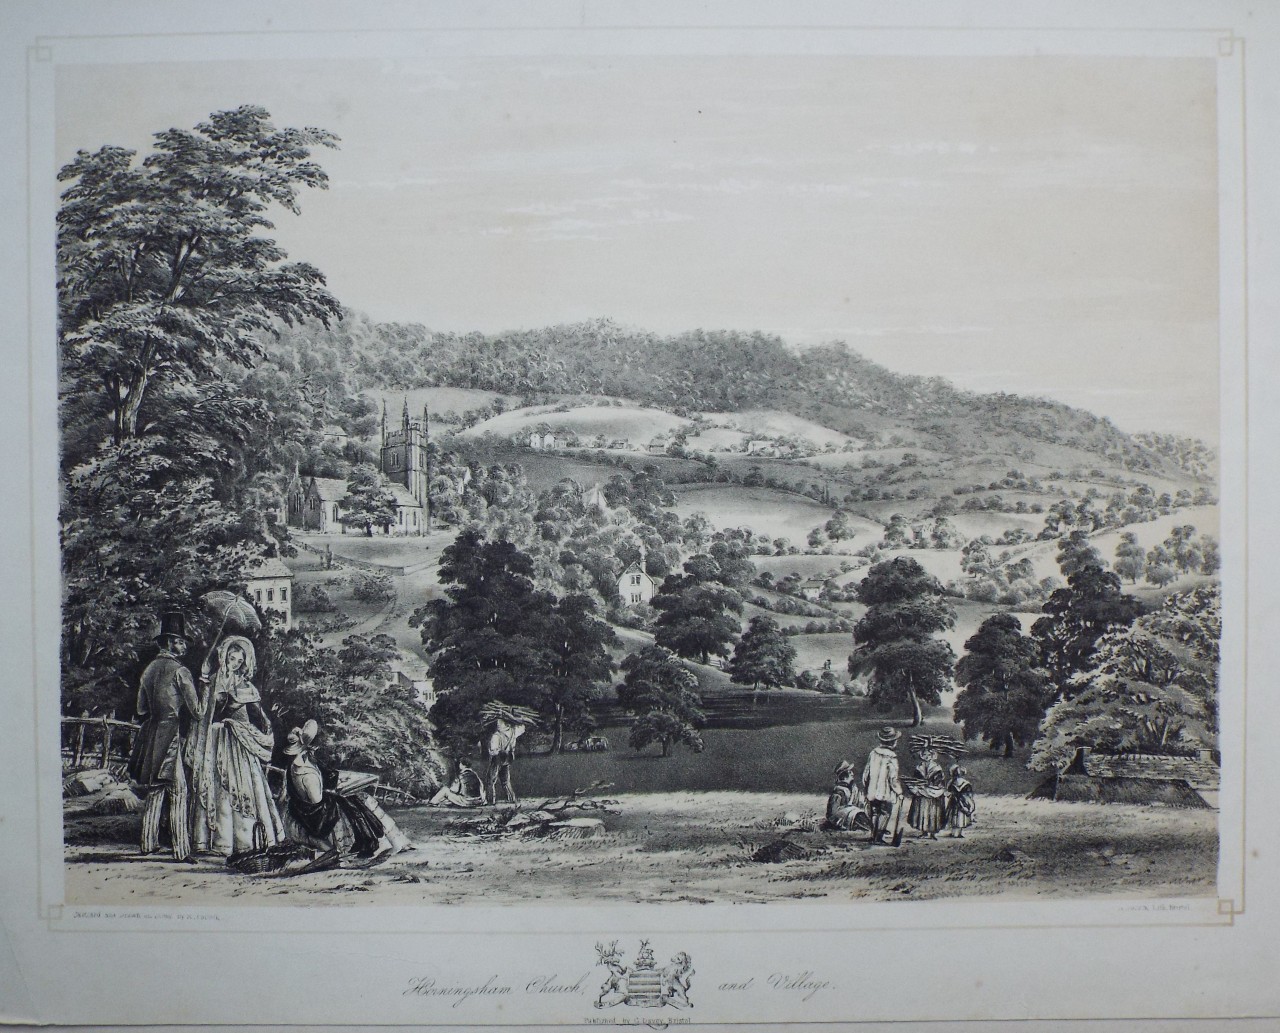 Lithograph - Horningsham Church, and Village. - Pocock